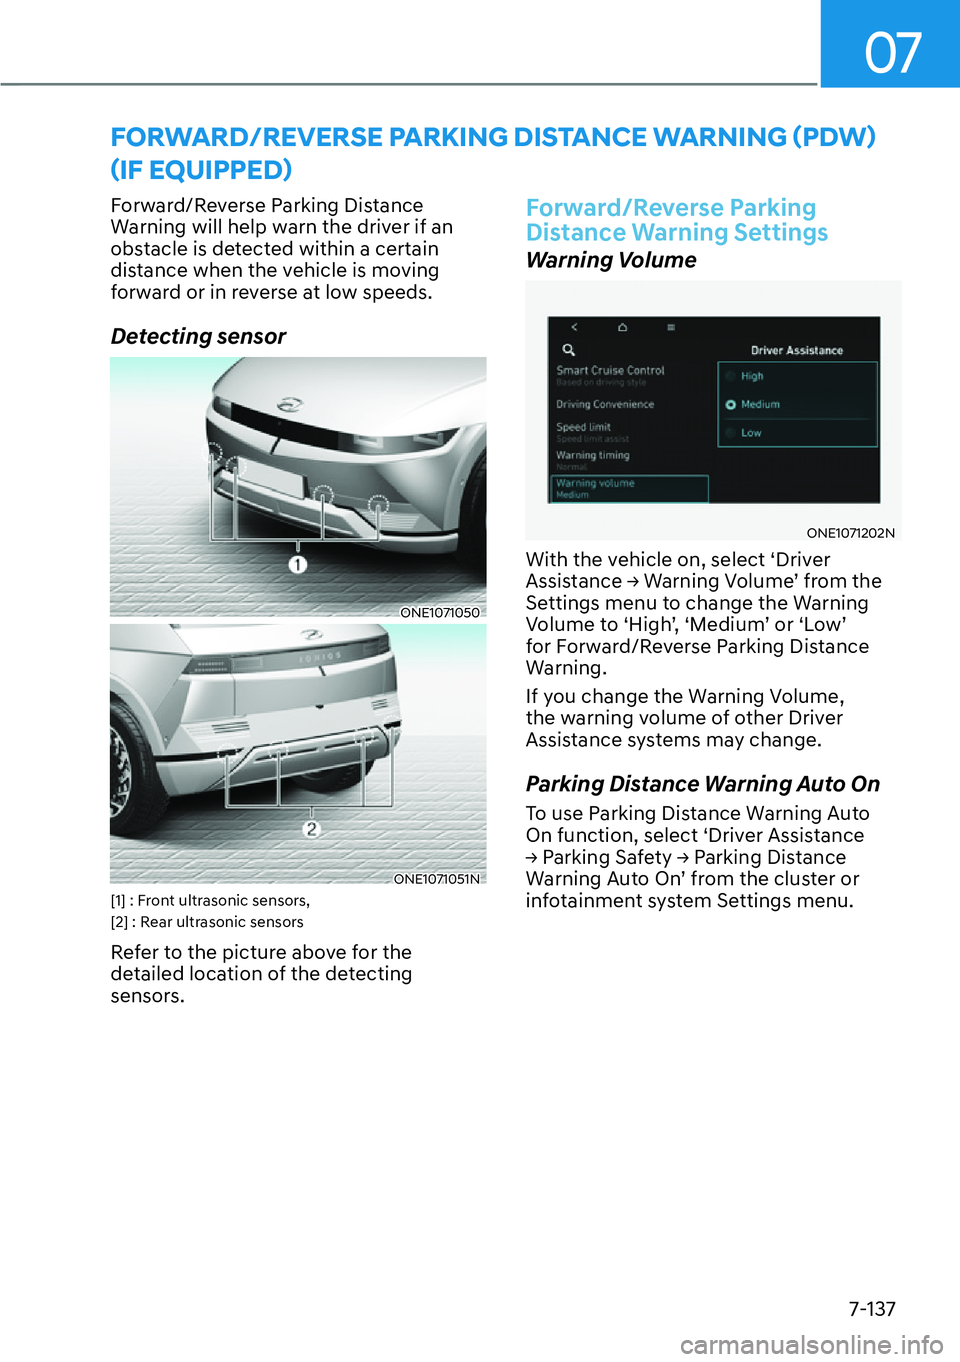 HYUNDAI IONIQ 5 2022  Owners Manual 07
7-137
Forward/Reverse Parking Distance 
Warning will help warn the driver if an 
obstacle is detected within a certain 
distance when the vehicle is moving 
forward or in reverse at low speeds.
Det